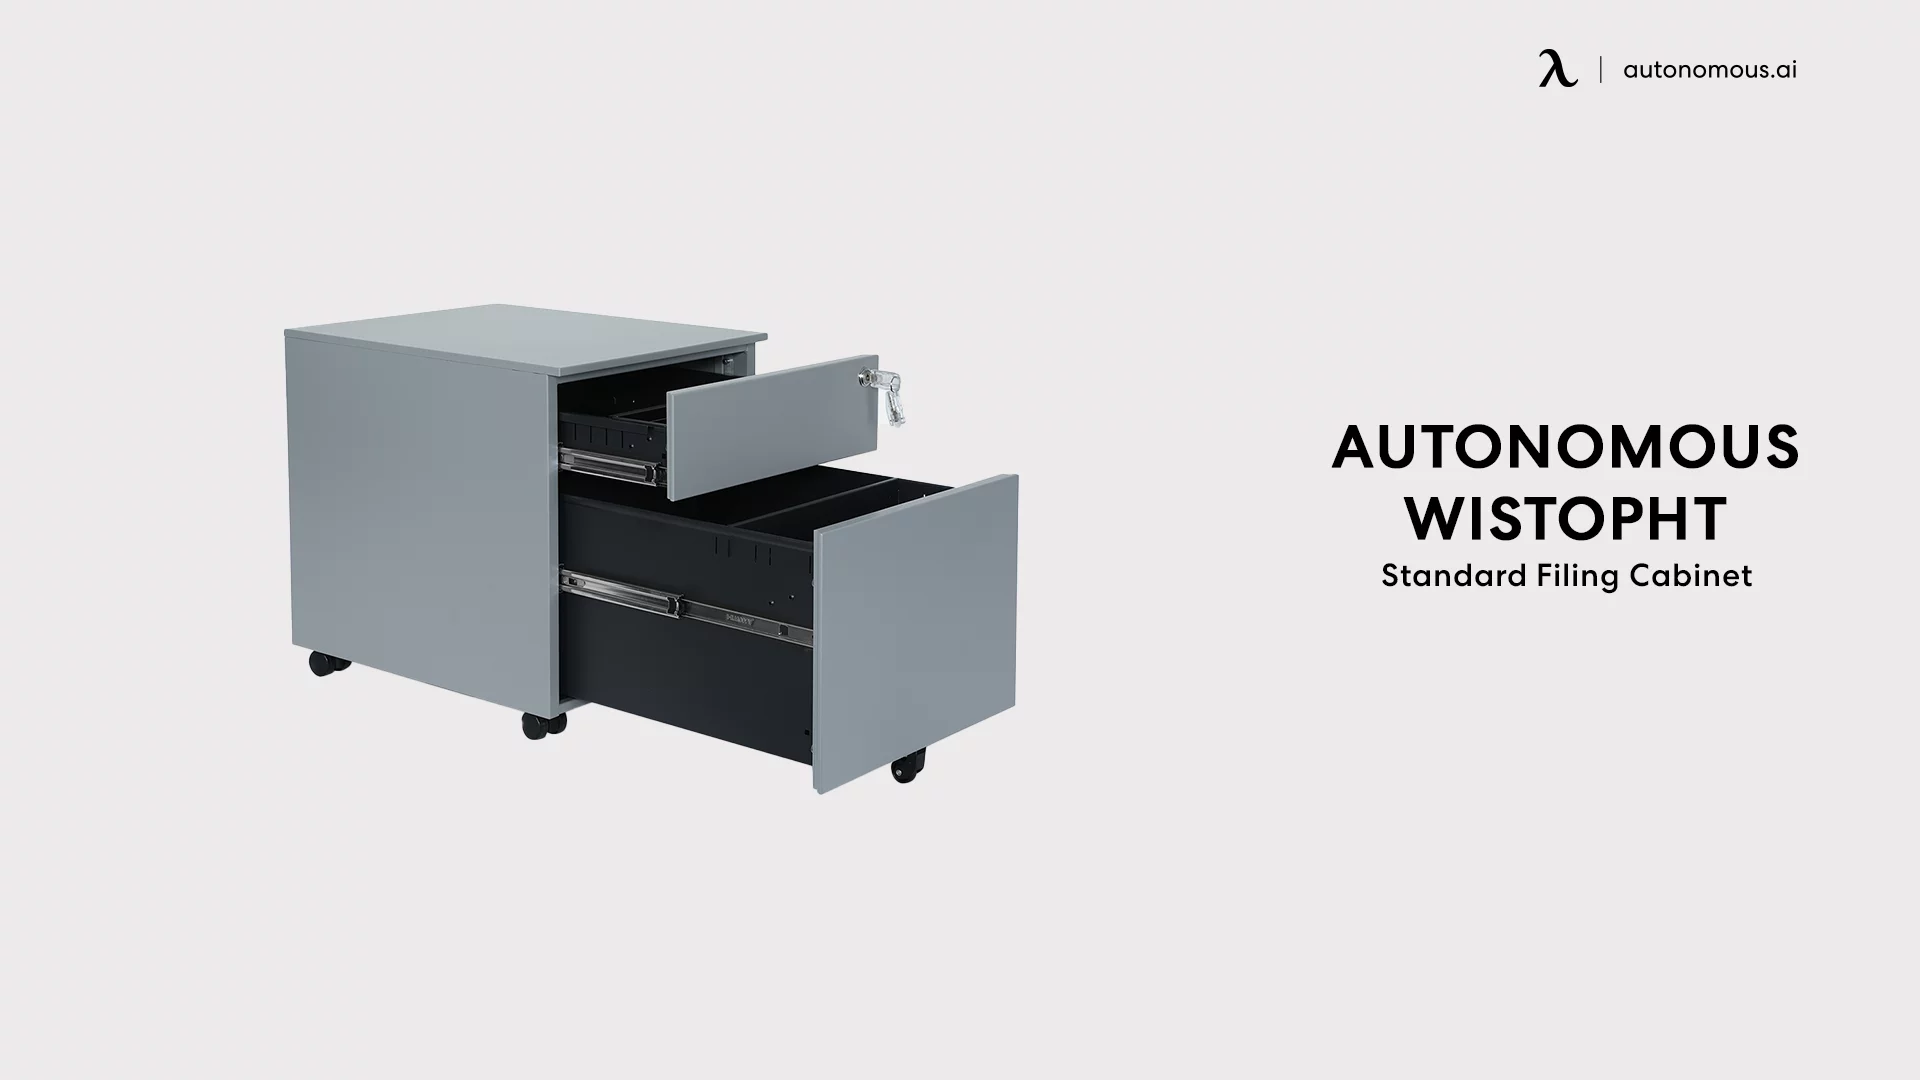 Standard Filing Cabinet From Autonomous and Wistopht